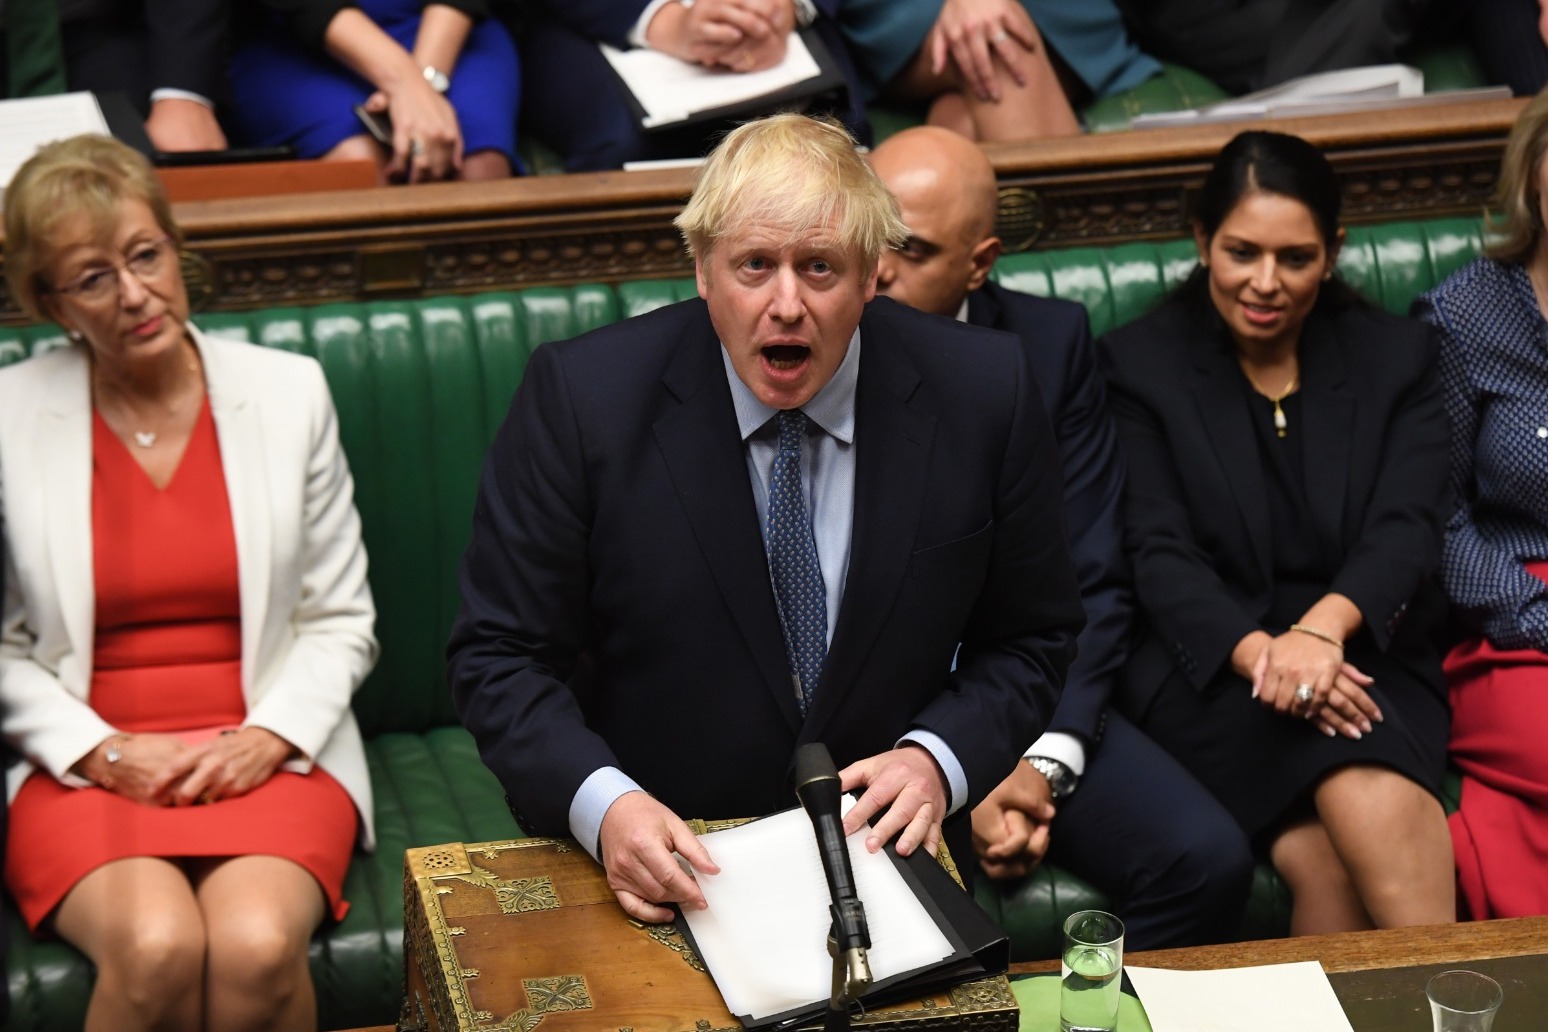 PM Johnson goads opponents to call election as Brexit chaos deepens 